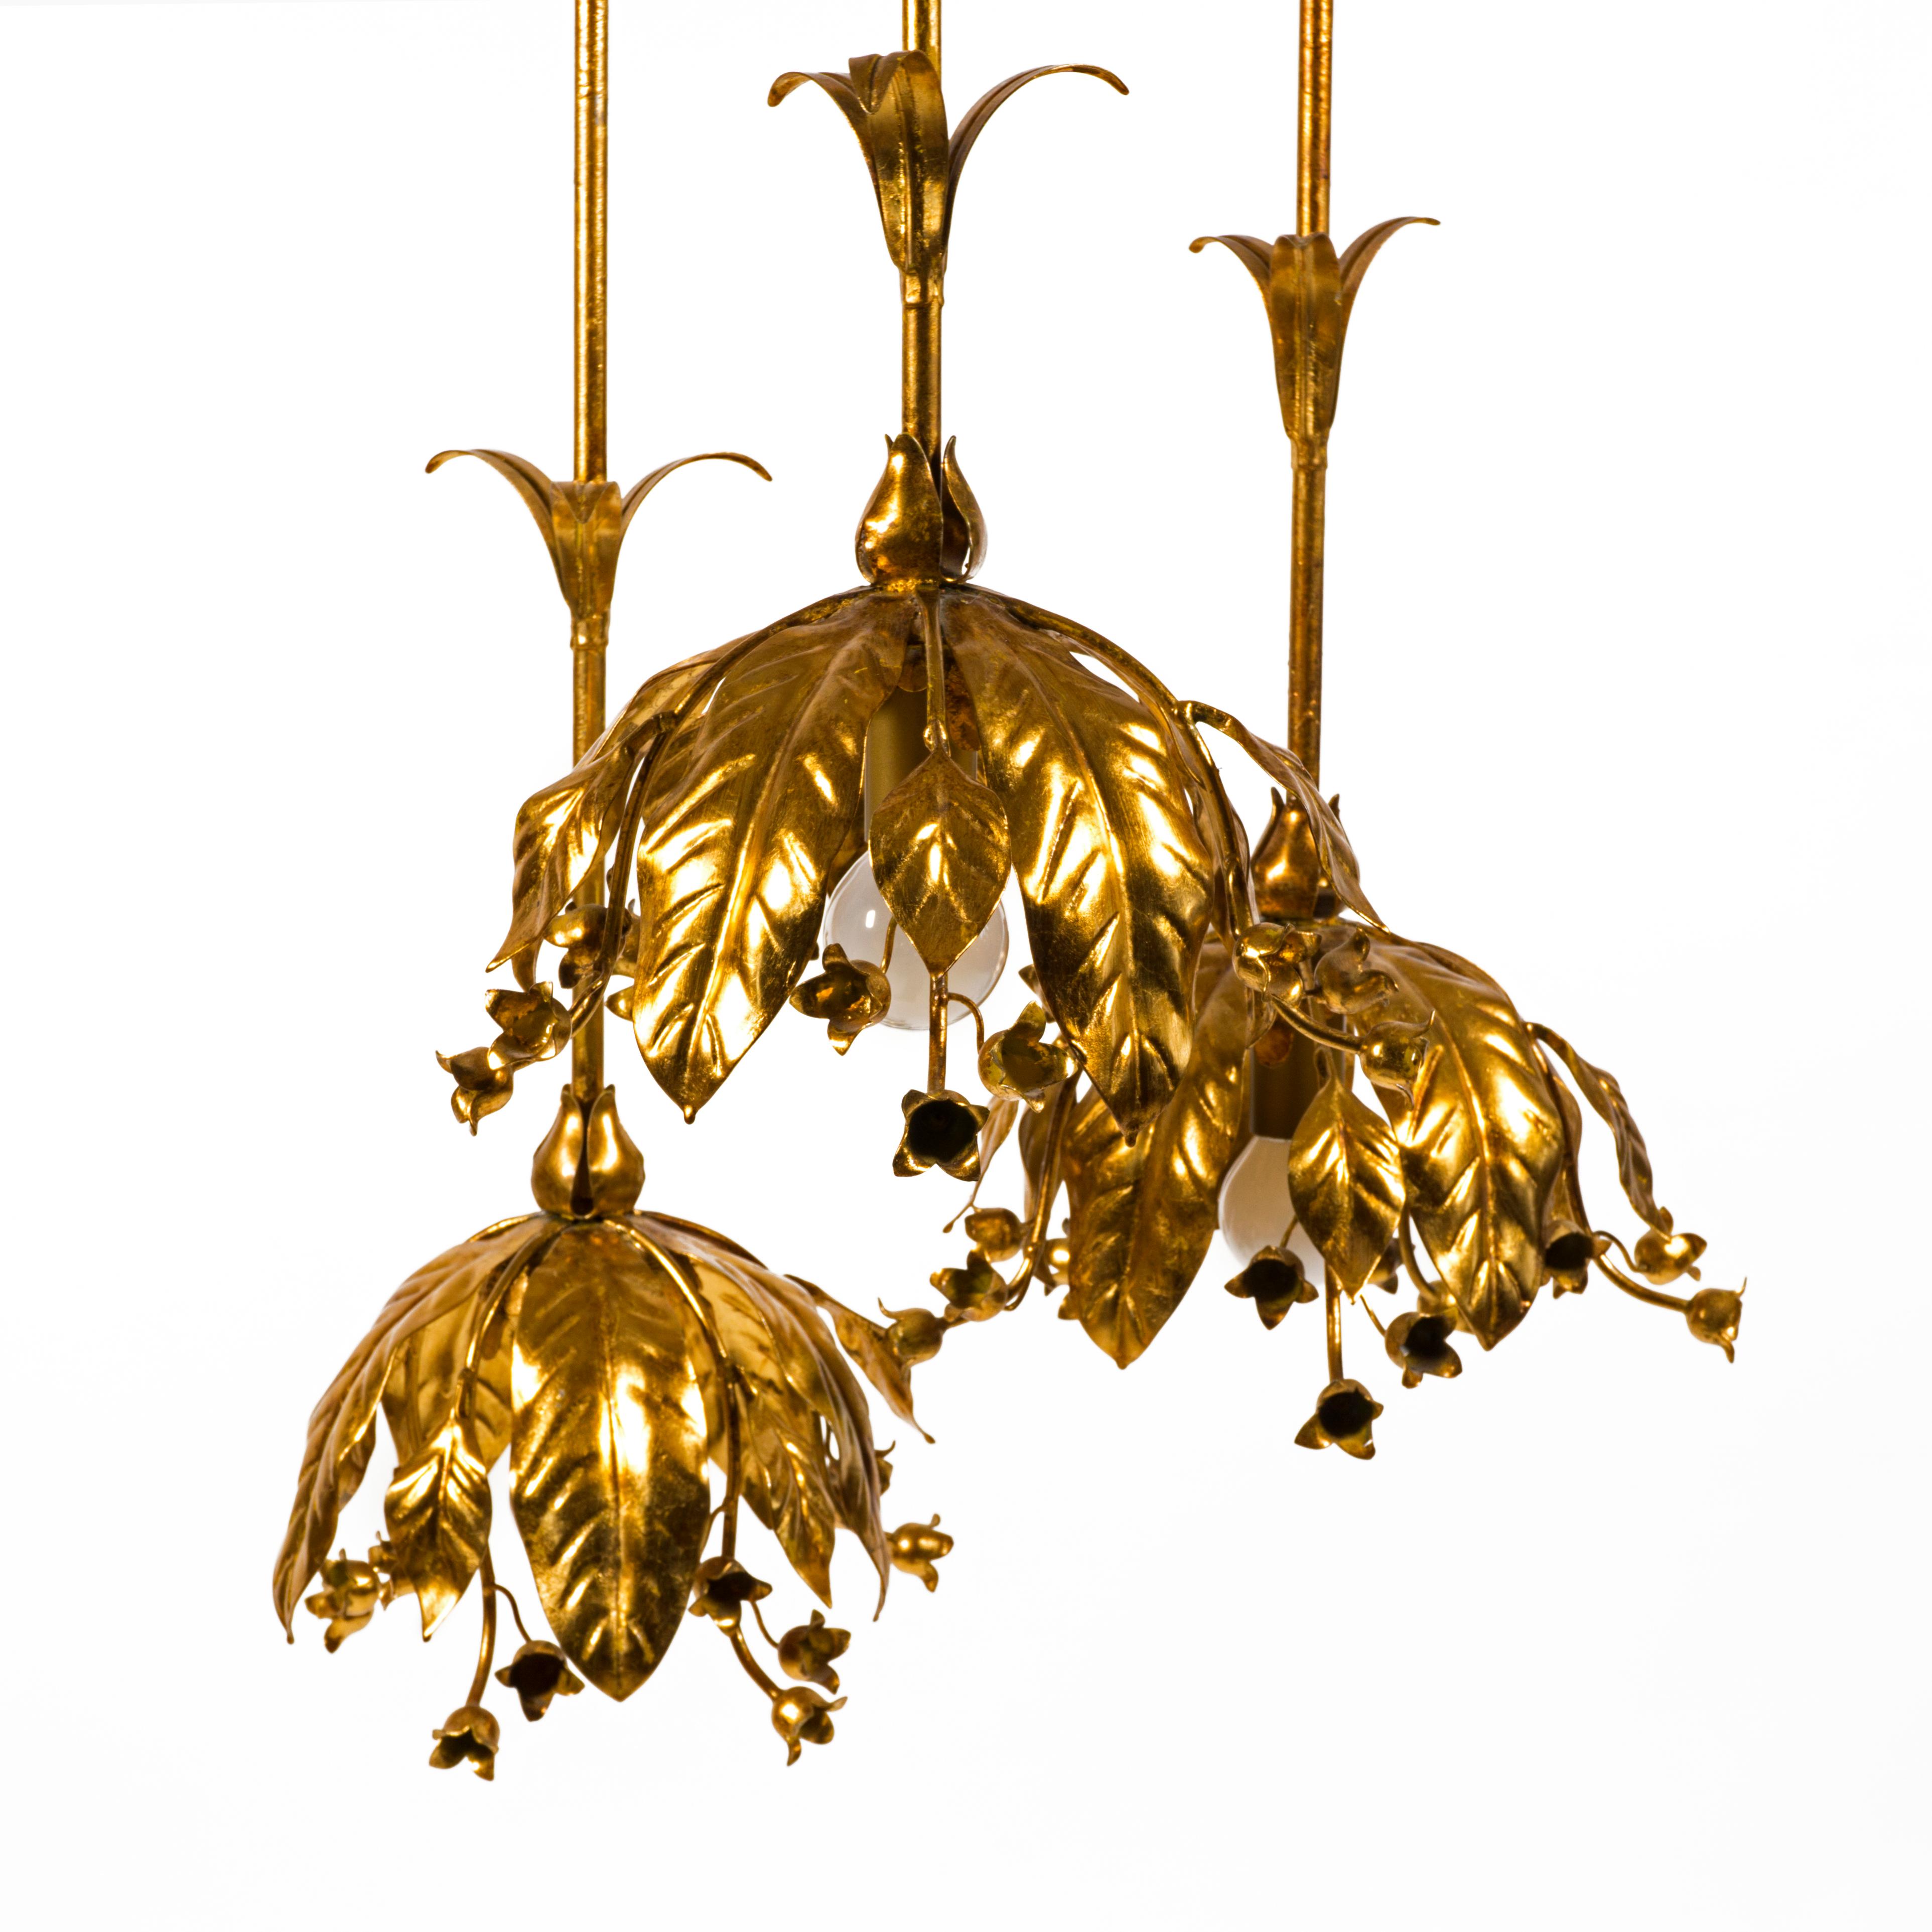 Italian Giltet Floral 1970s Pendant Light Chandelier by Banci Firenze, Italy